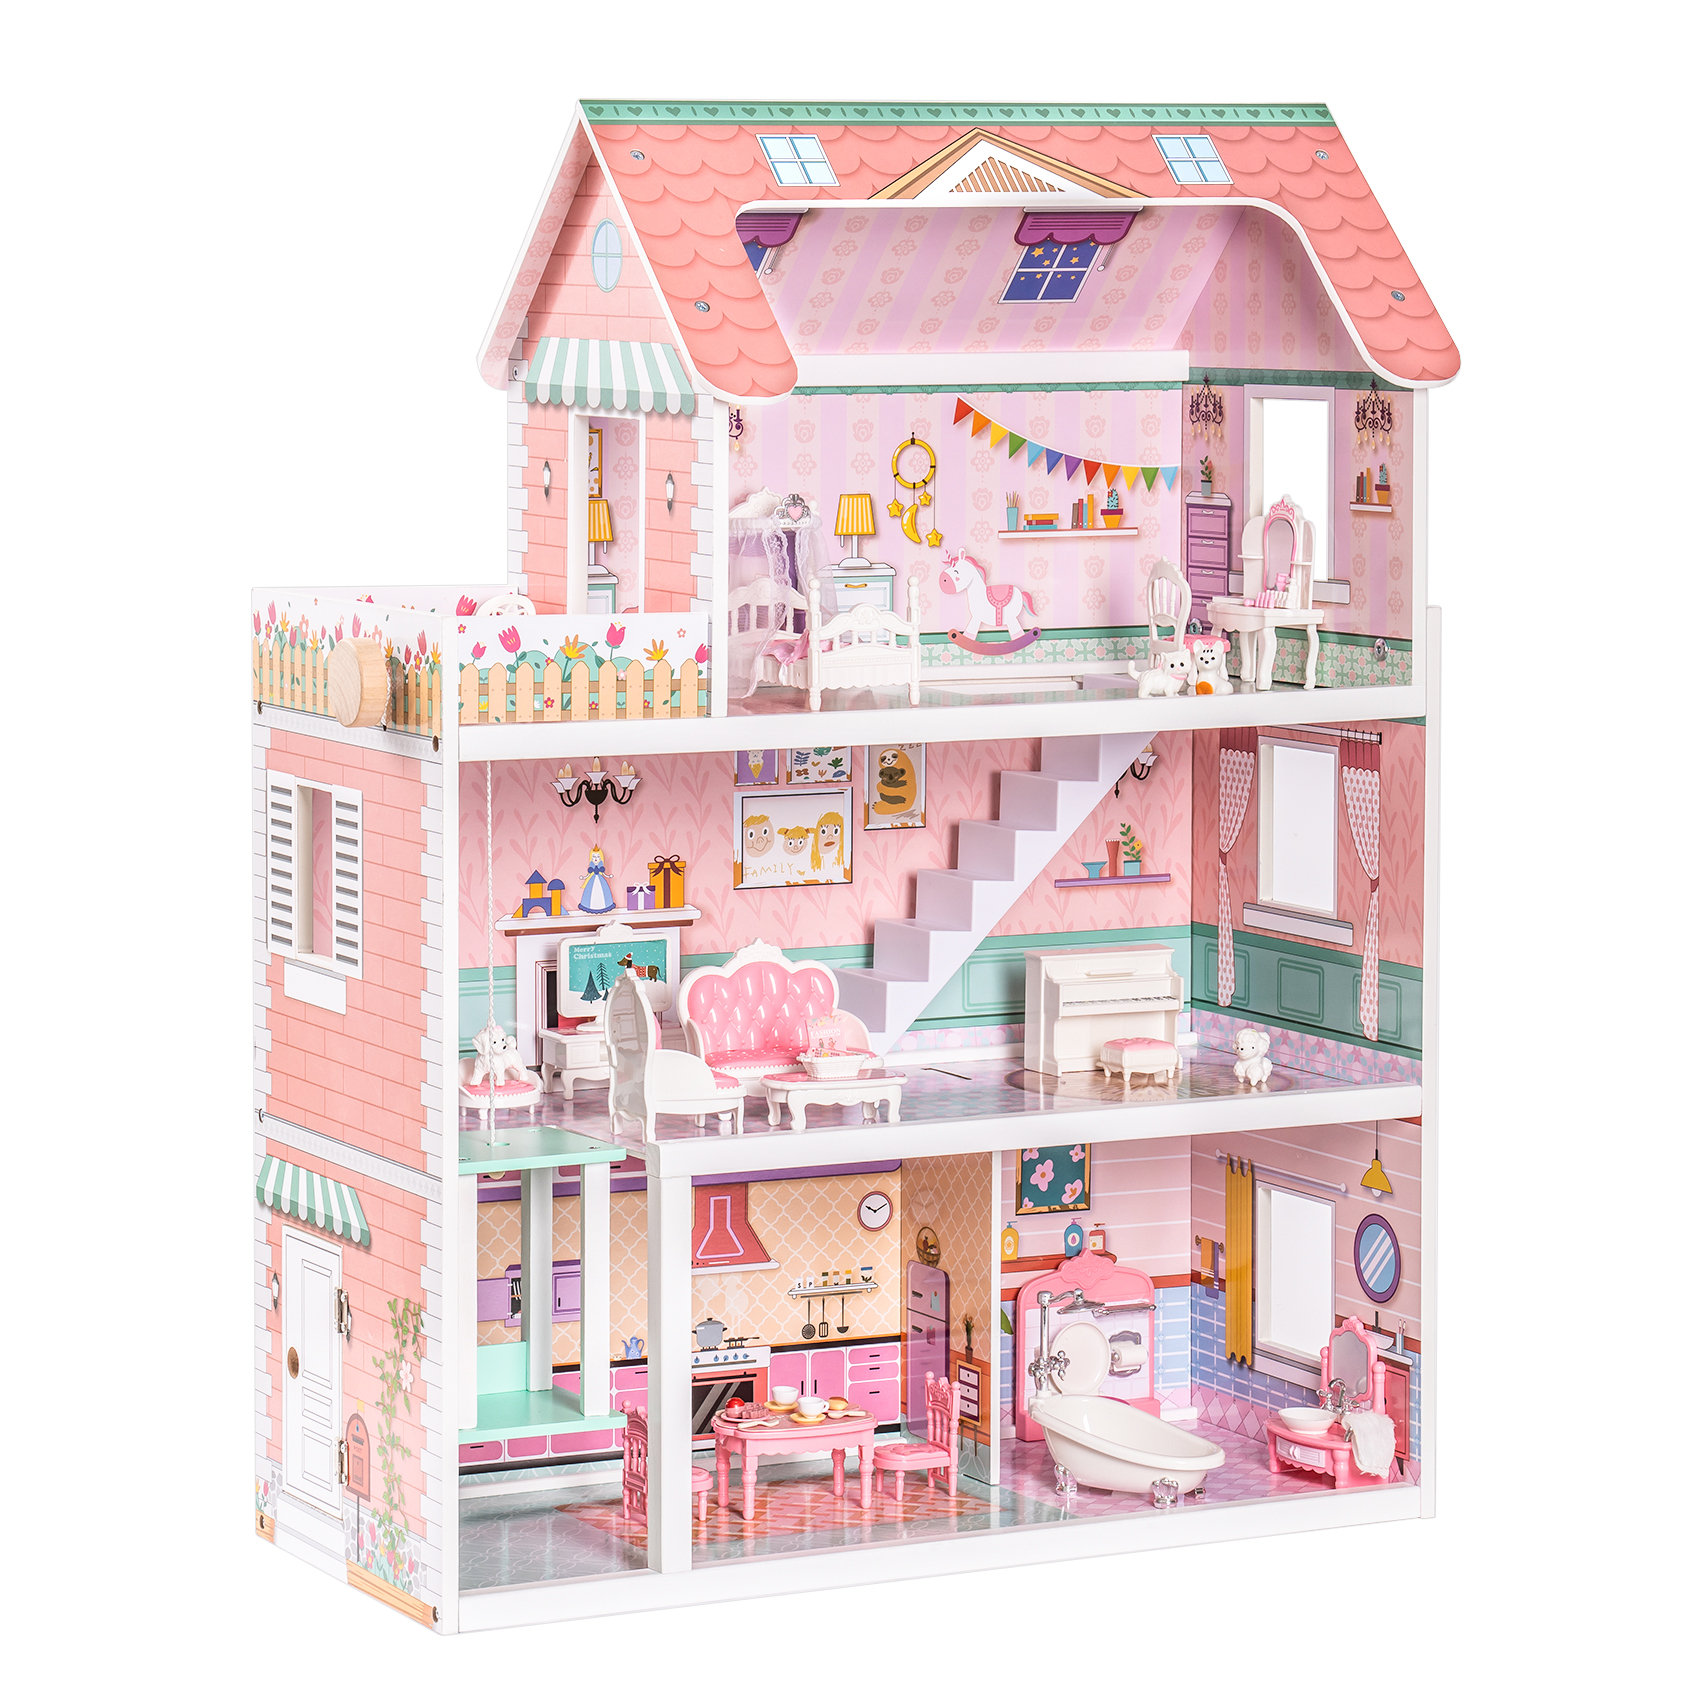 ROBUD Classic And Stylish Dollhouse For Kids & Reviews | Wayfair